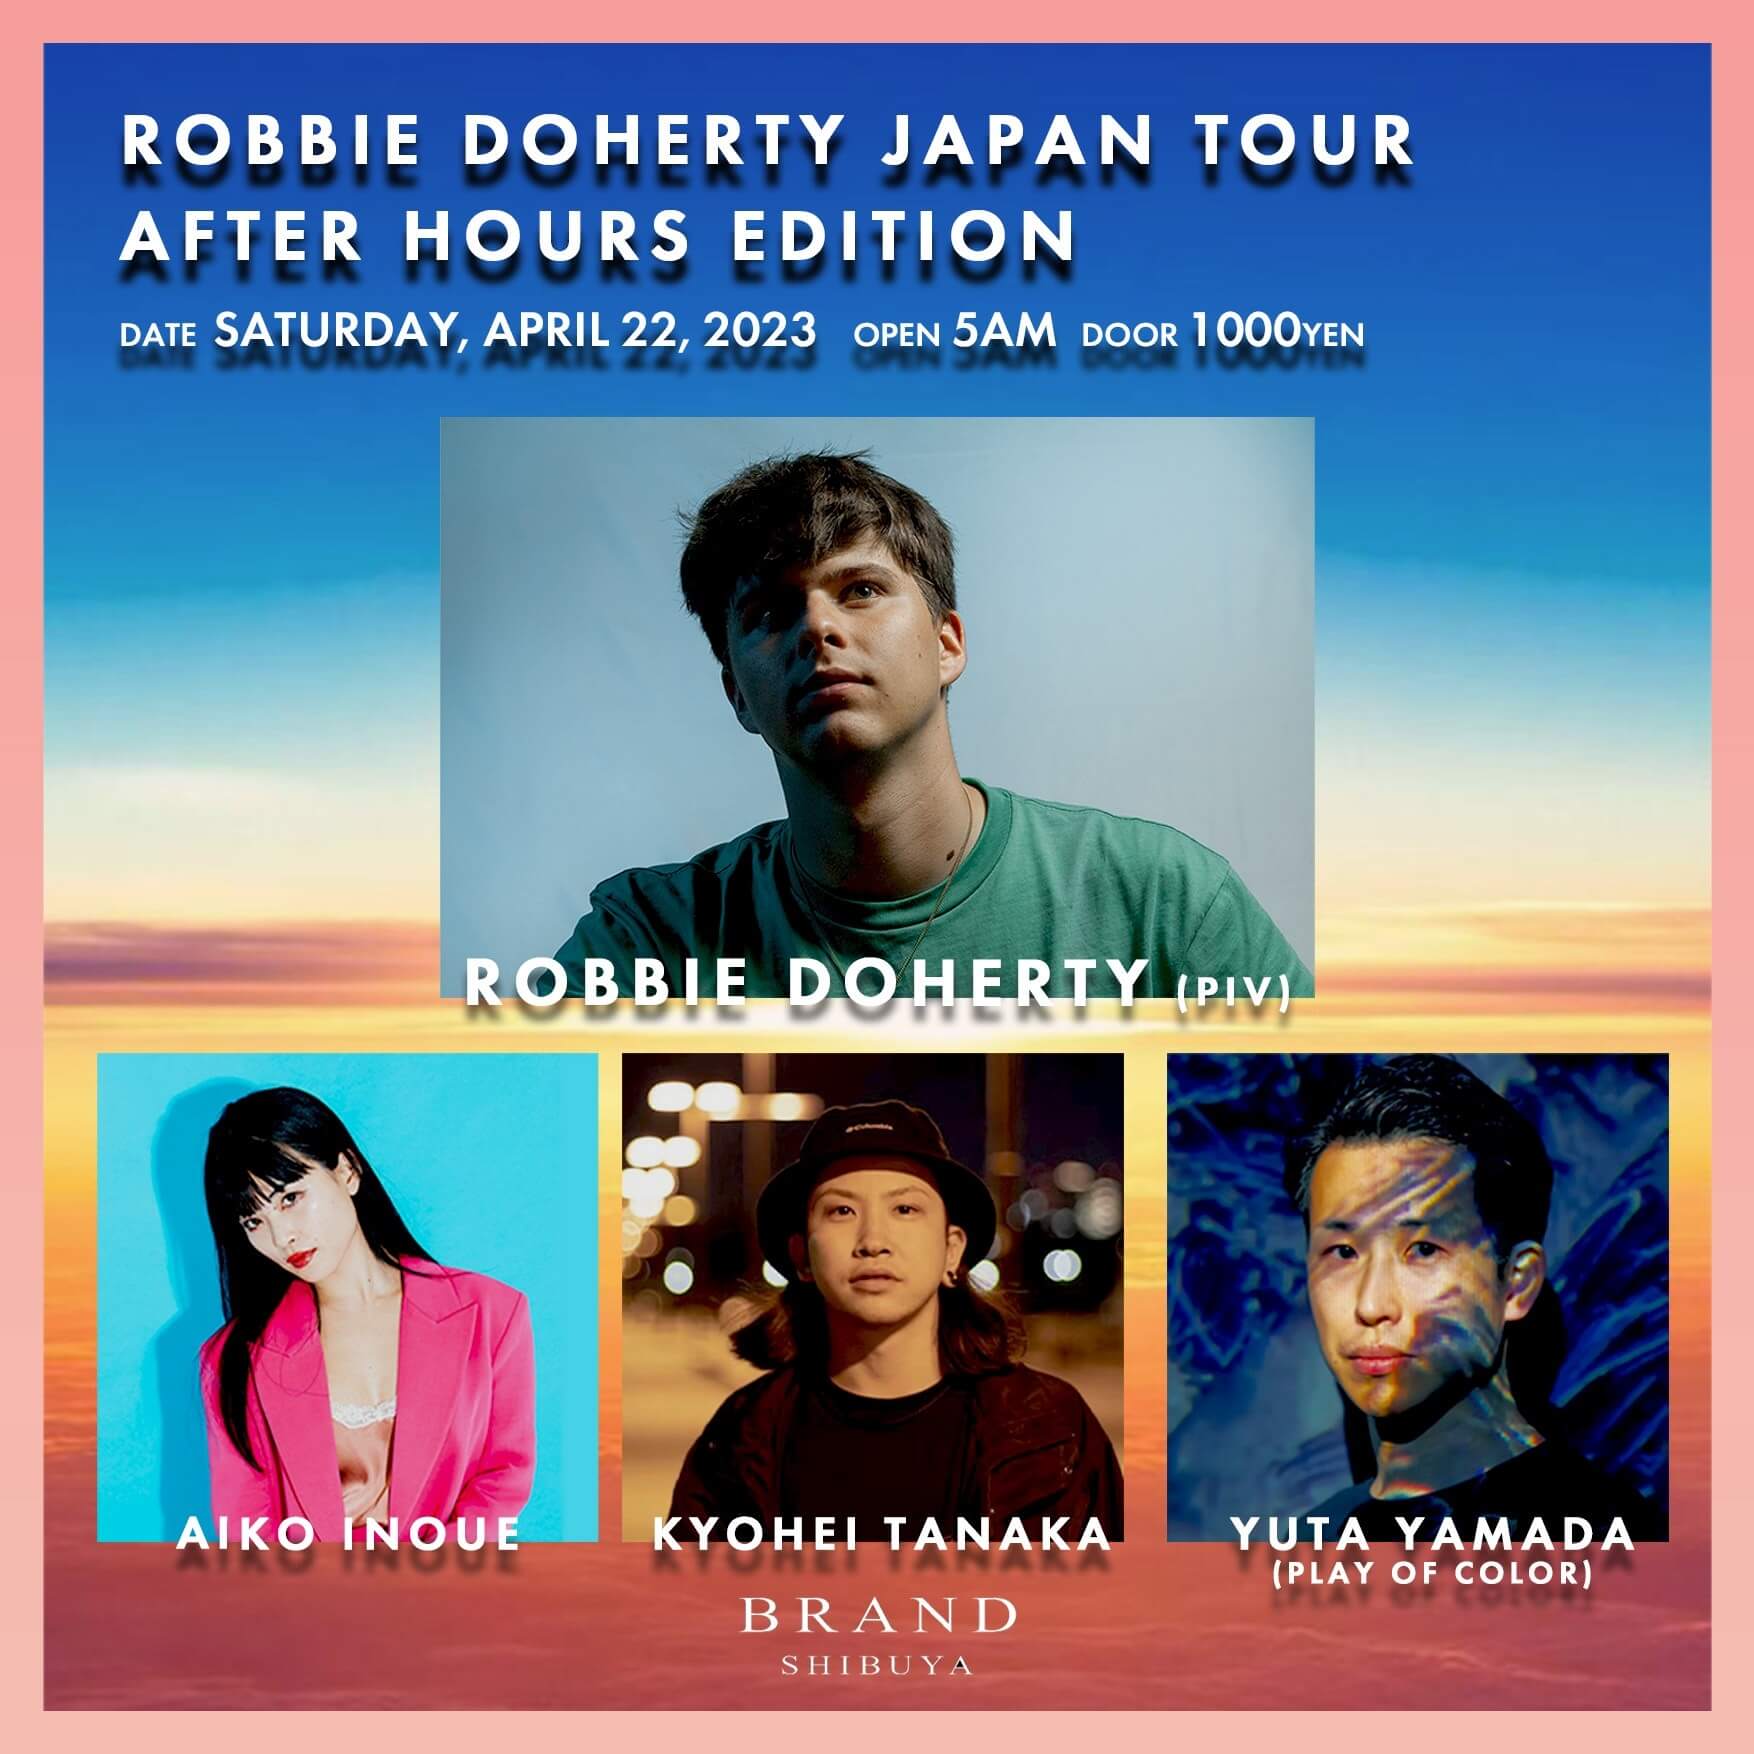 ROBBIE DOHERTY JAPAN TOUR AFTER HOURS EDITION 2023年04月22日（土曜日）に渋谷 クラブのBRAND SHIBUYAで開催されるHOUSEイベント